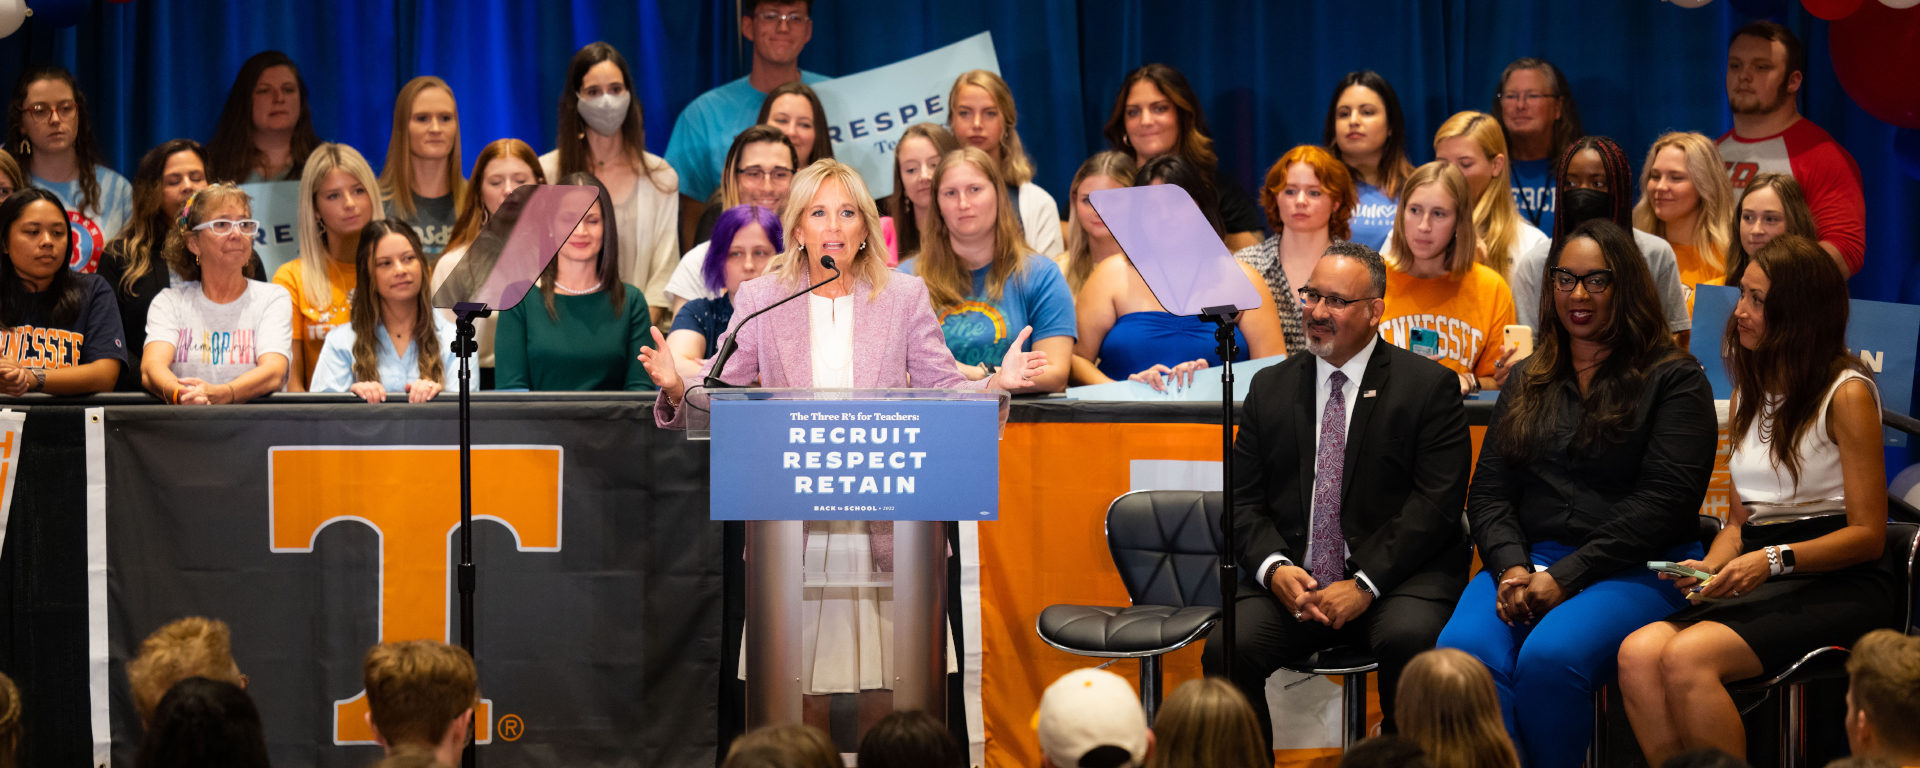 First Lady Jill Biden and U.S. Secretary of Education Miguel Cardona visited UT Knoxville in September to recognize Tennessee’s Grow Your Own teacher pipeline program.